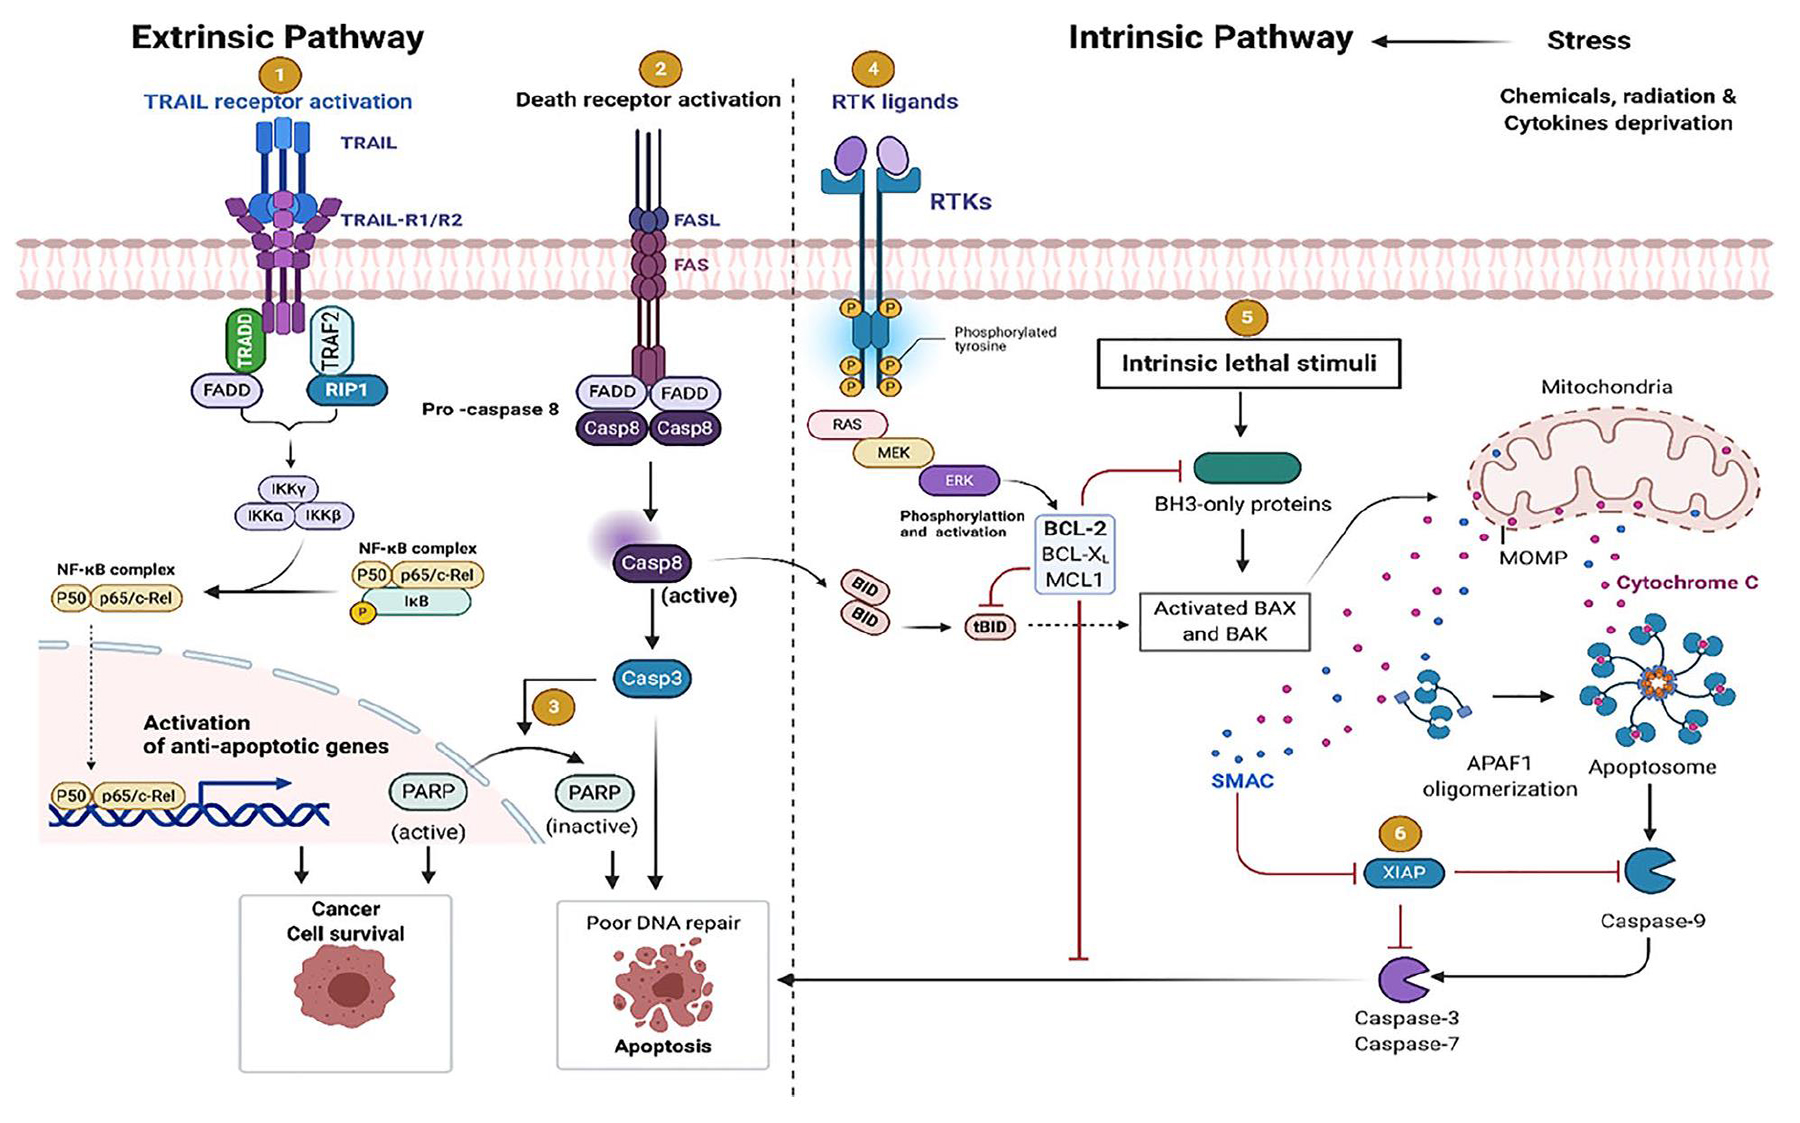 Figure 1 Mechanism of apoptosis and alteration of its pathways in cancer. (Das, 2021)